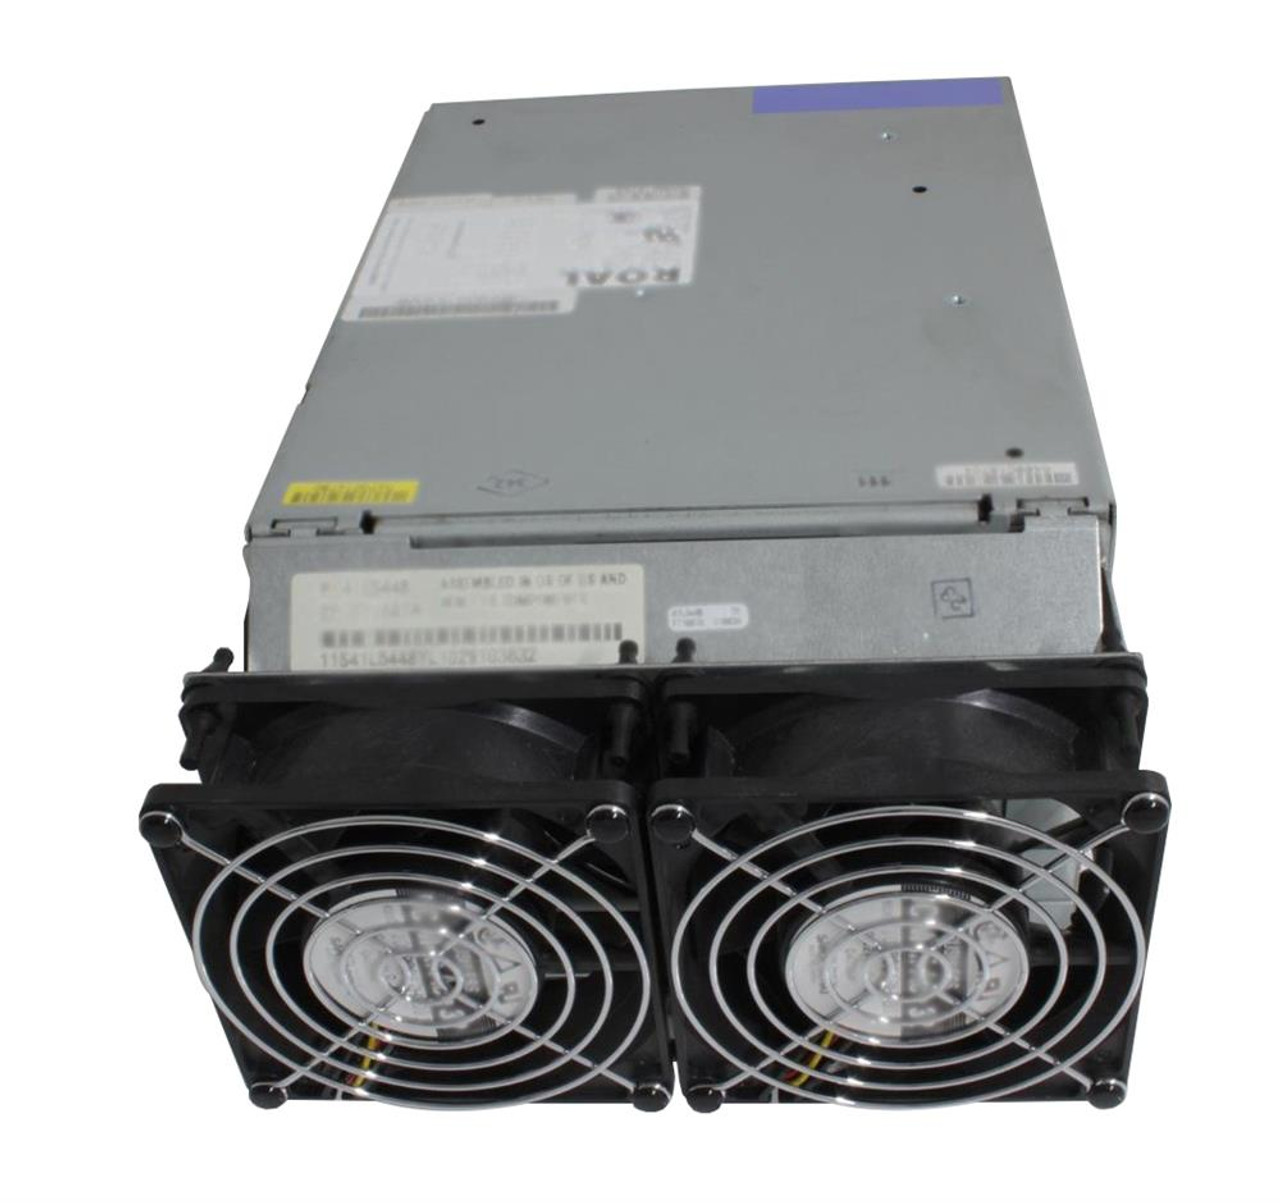 23F0047 IBM 75-Watts Power Supply for RS6000 Server